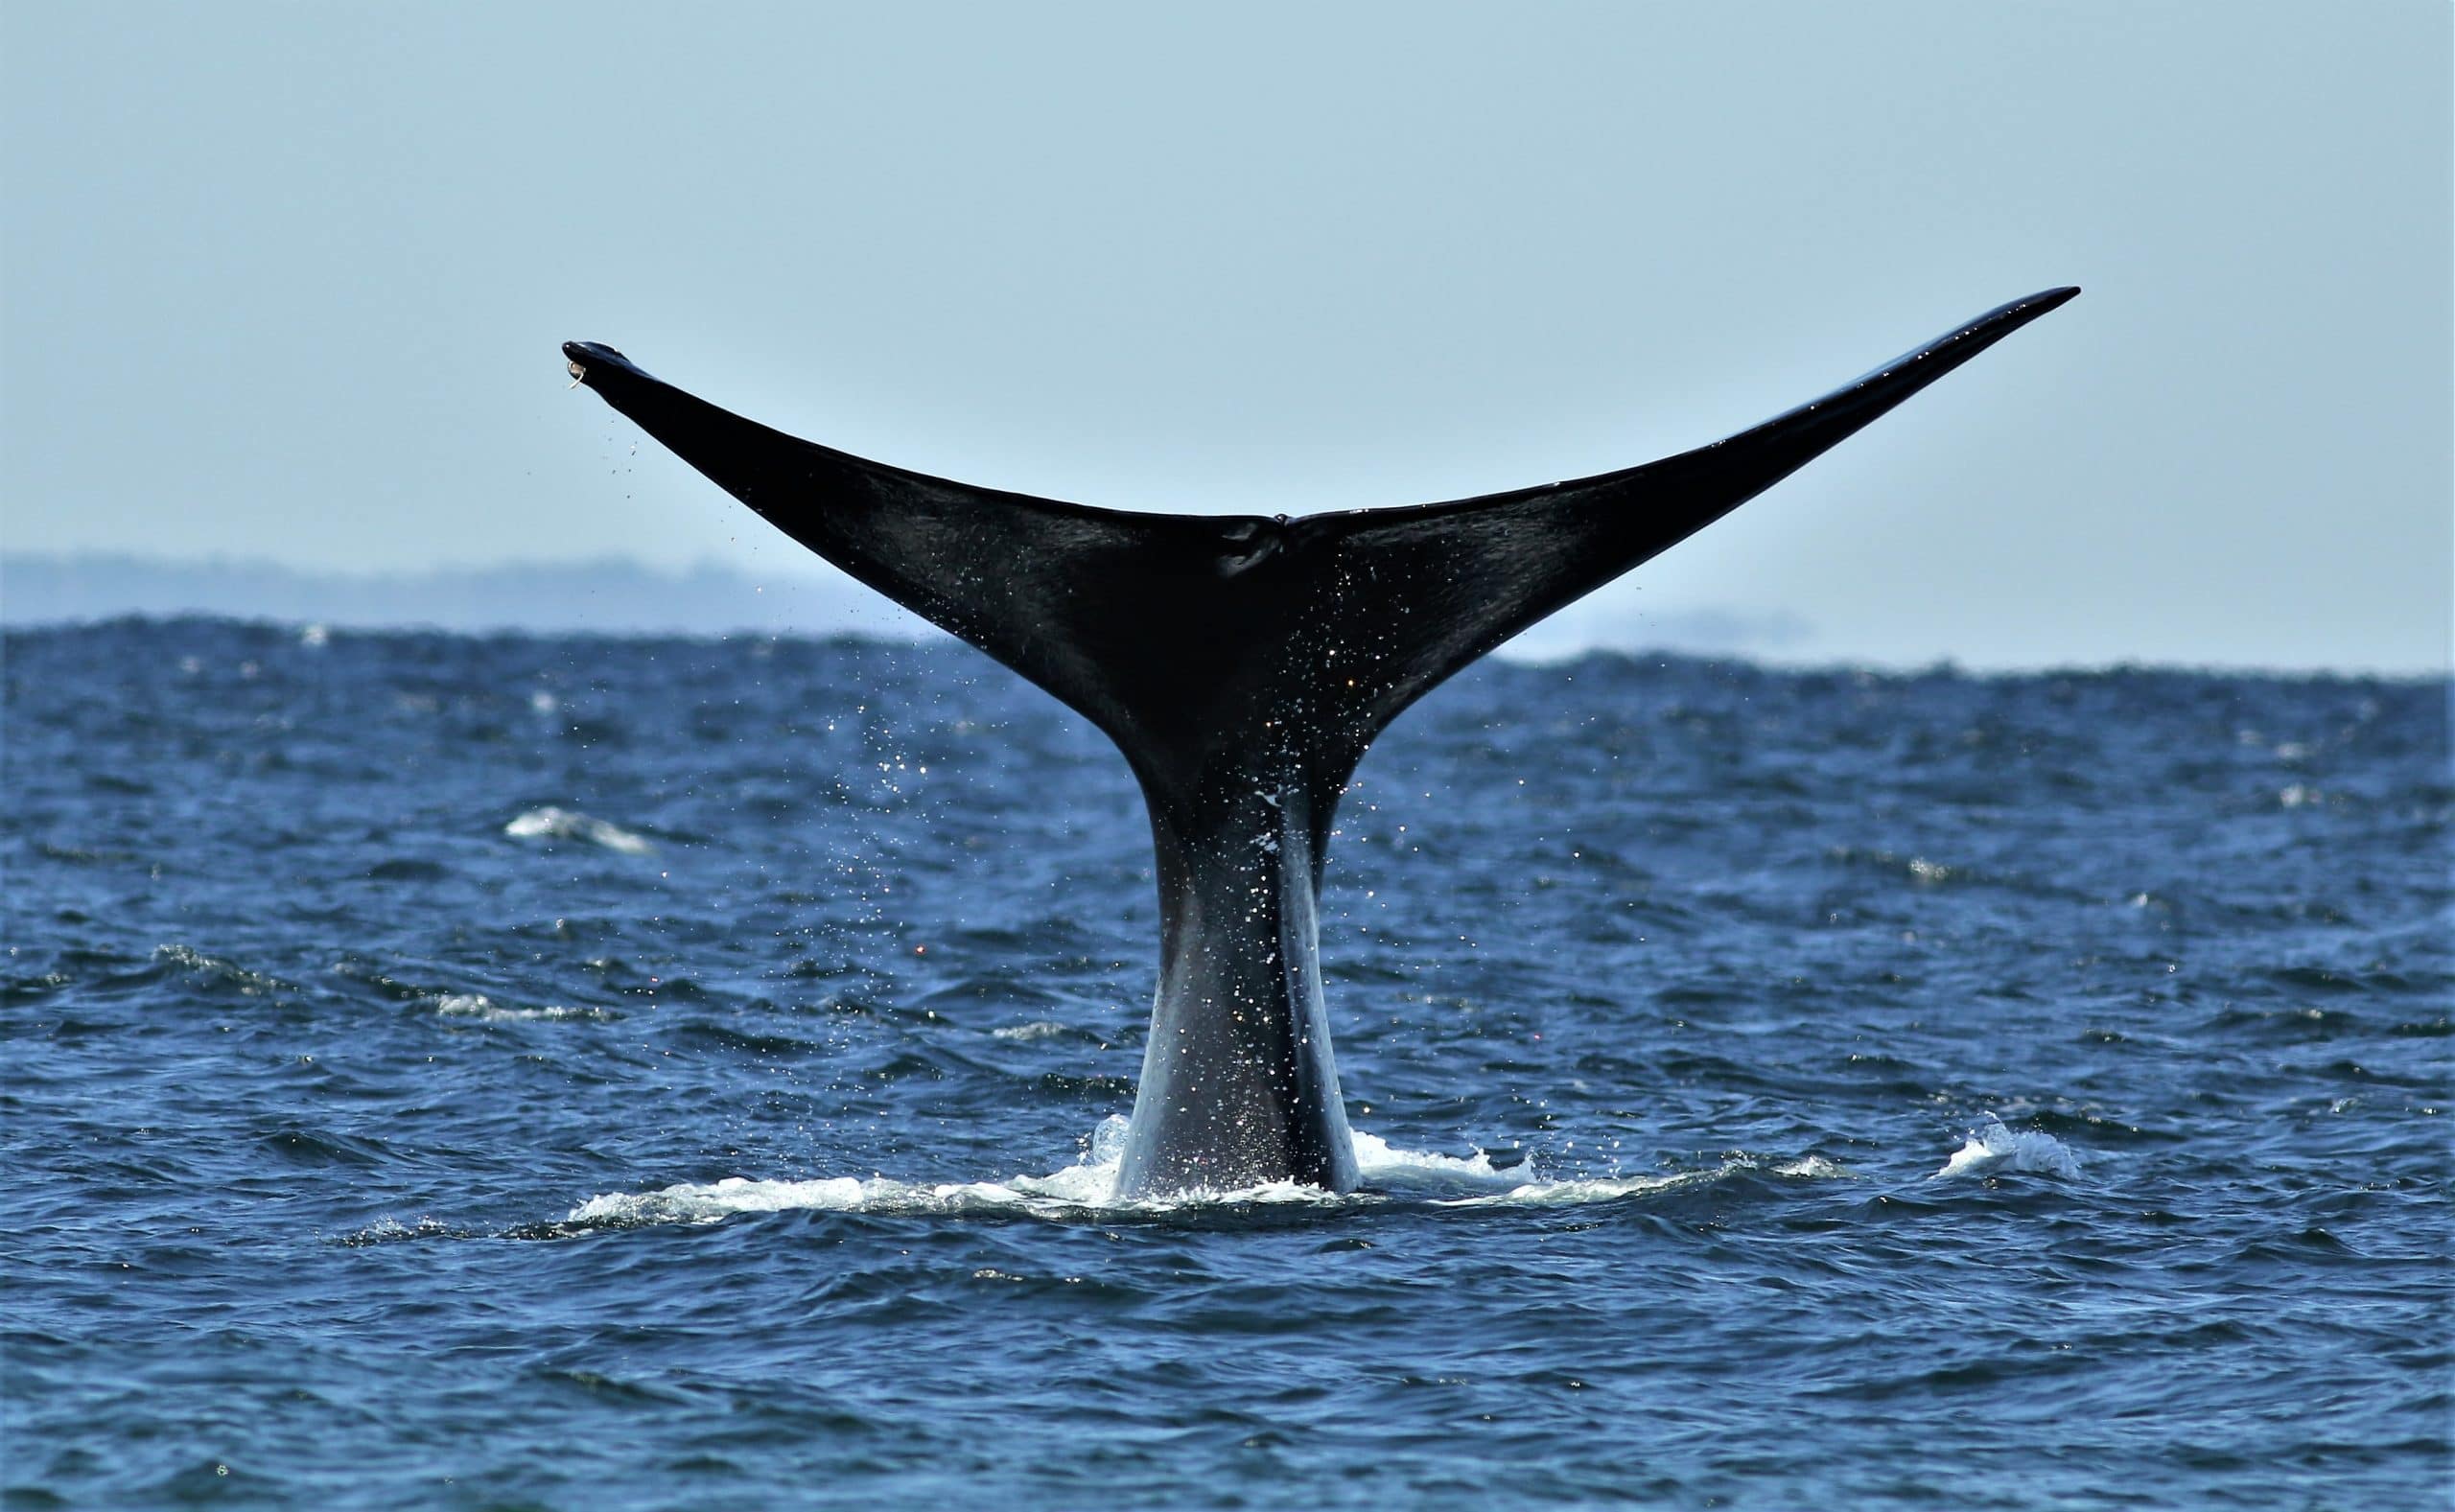 A North Atlantic right whale lifts its fluke out of the water